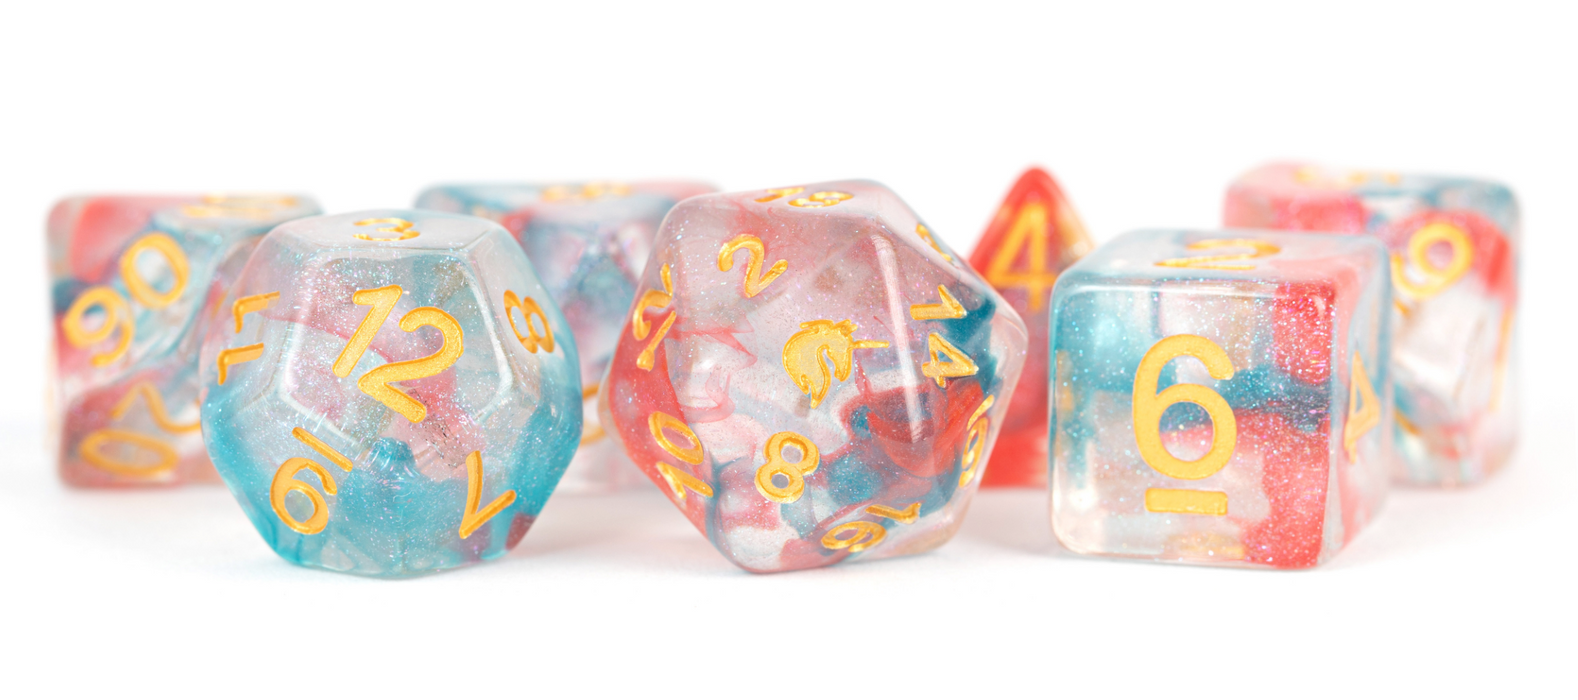 16mm Resin Poly Dice Set - Unicorn Astral Swell